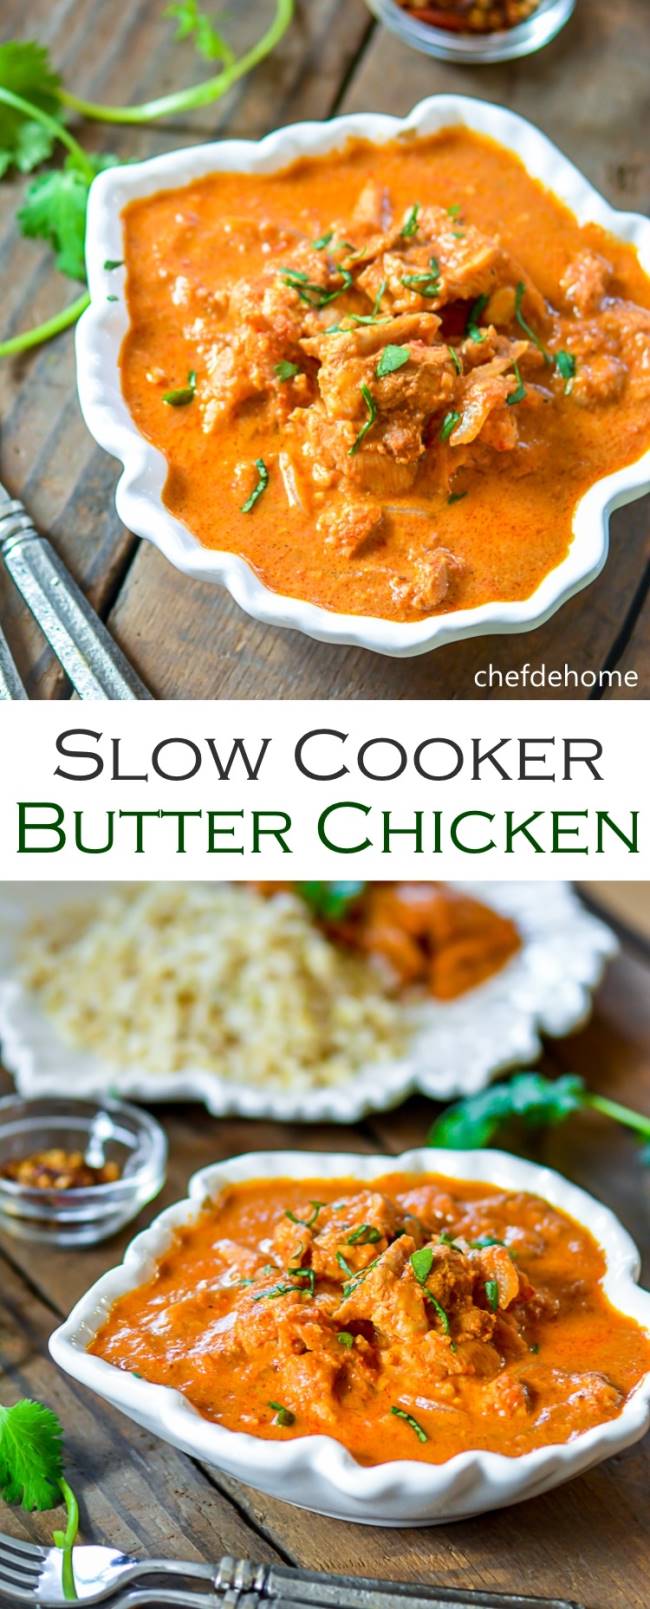 Restaurant Style Butter Chicken in Slow Cooker Recipe | ChefDeHome.com